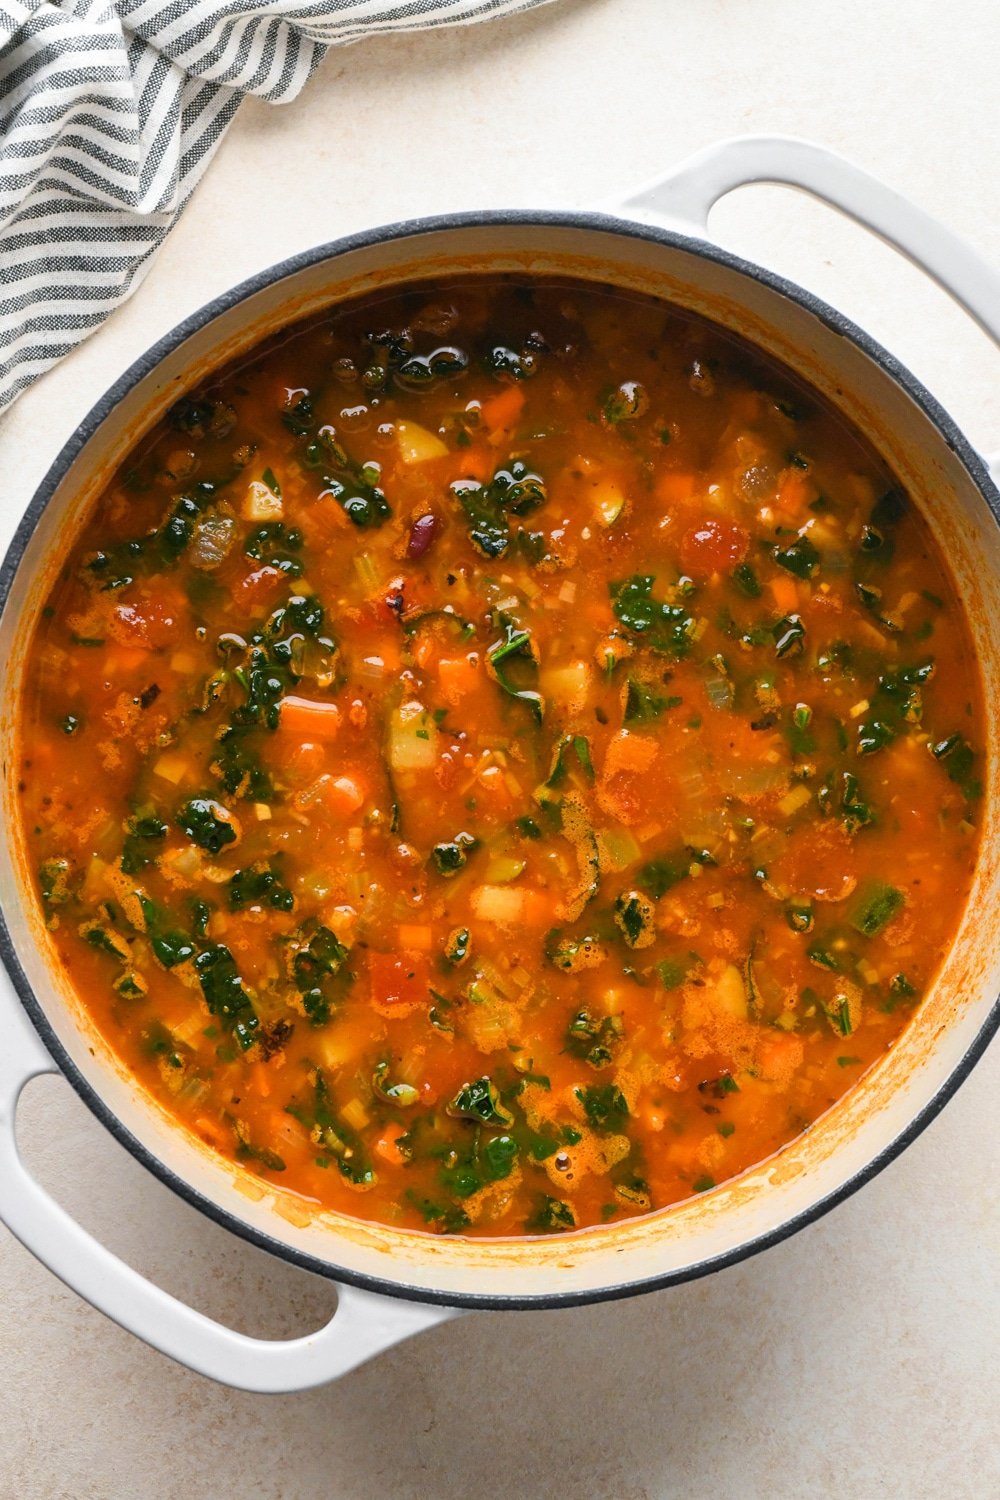 How to make Gluten Free Minestrone Soup: Kidney beans, chopped lacinato kale, and chopped fresh parsley added to the soup after cooking.